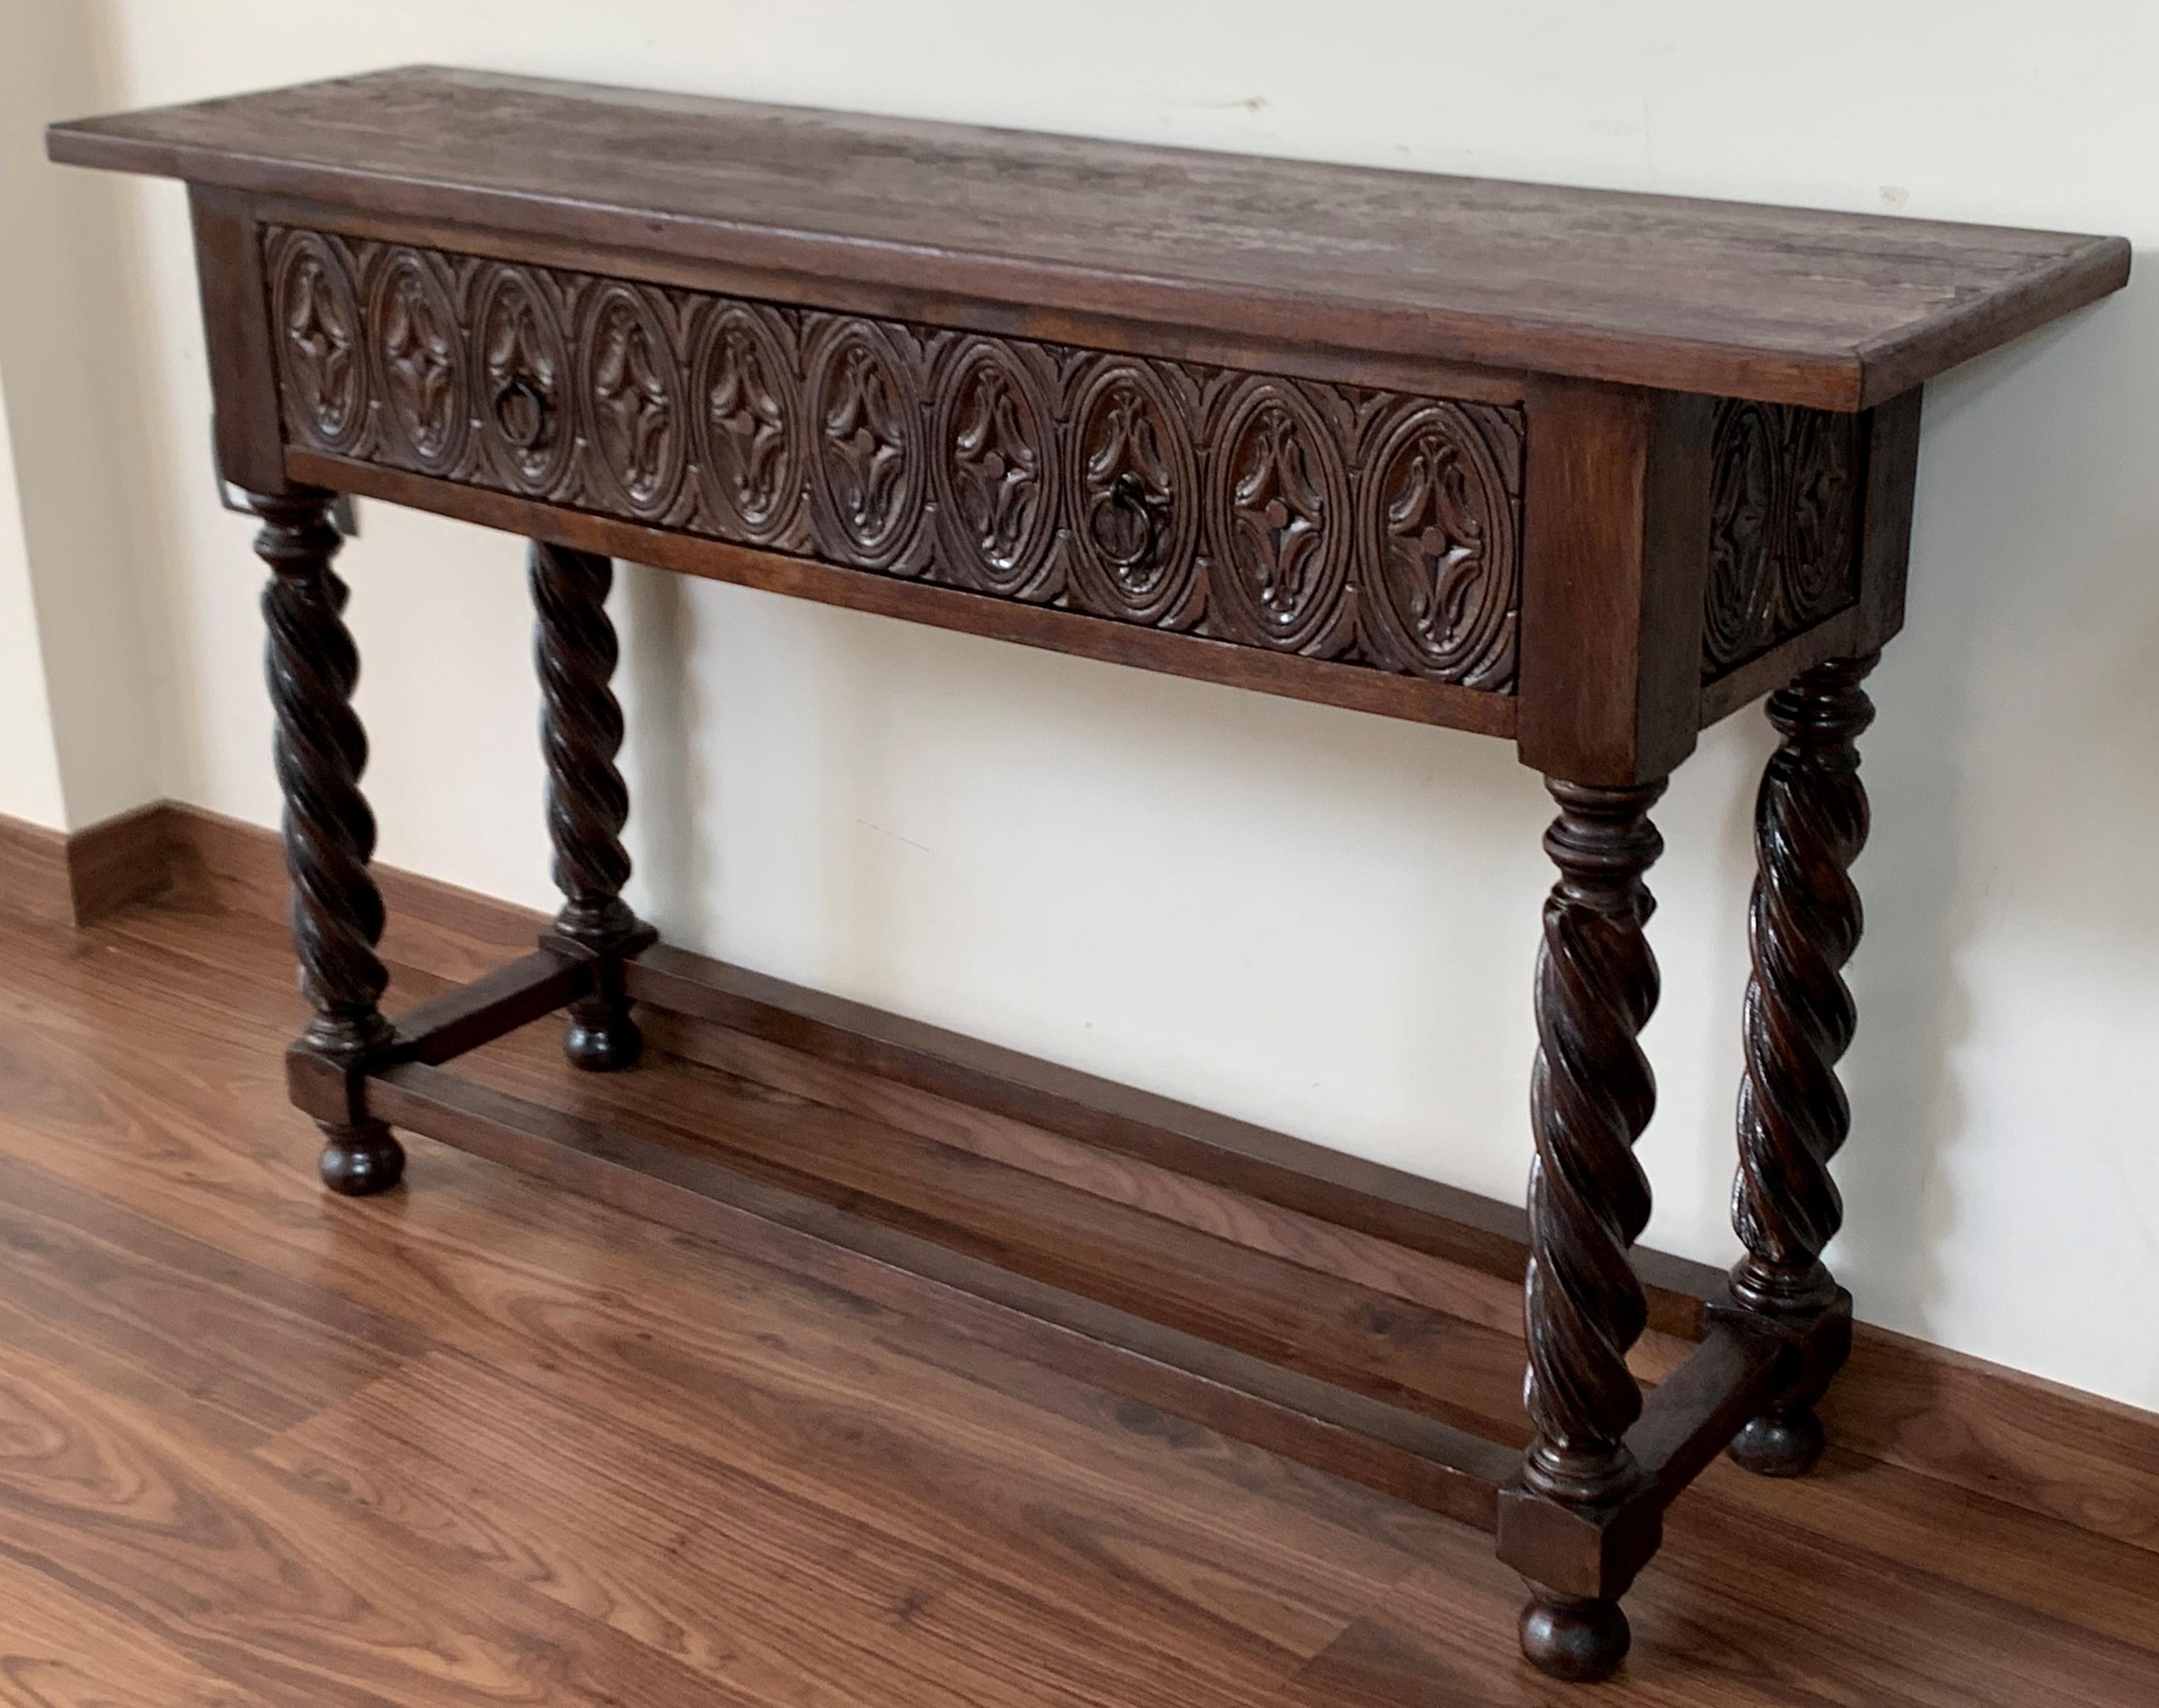 18th Century 18th Carved Two-Drawer Baroque Spanish Walnut Console Table with Iron Hardware